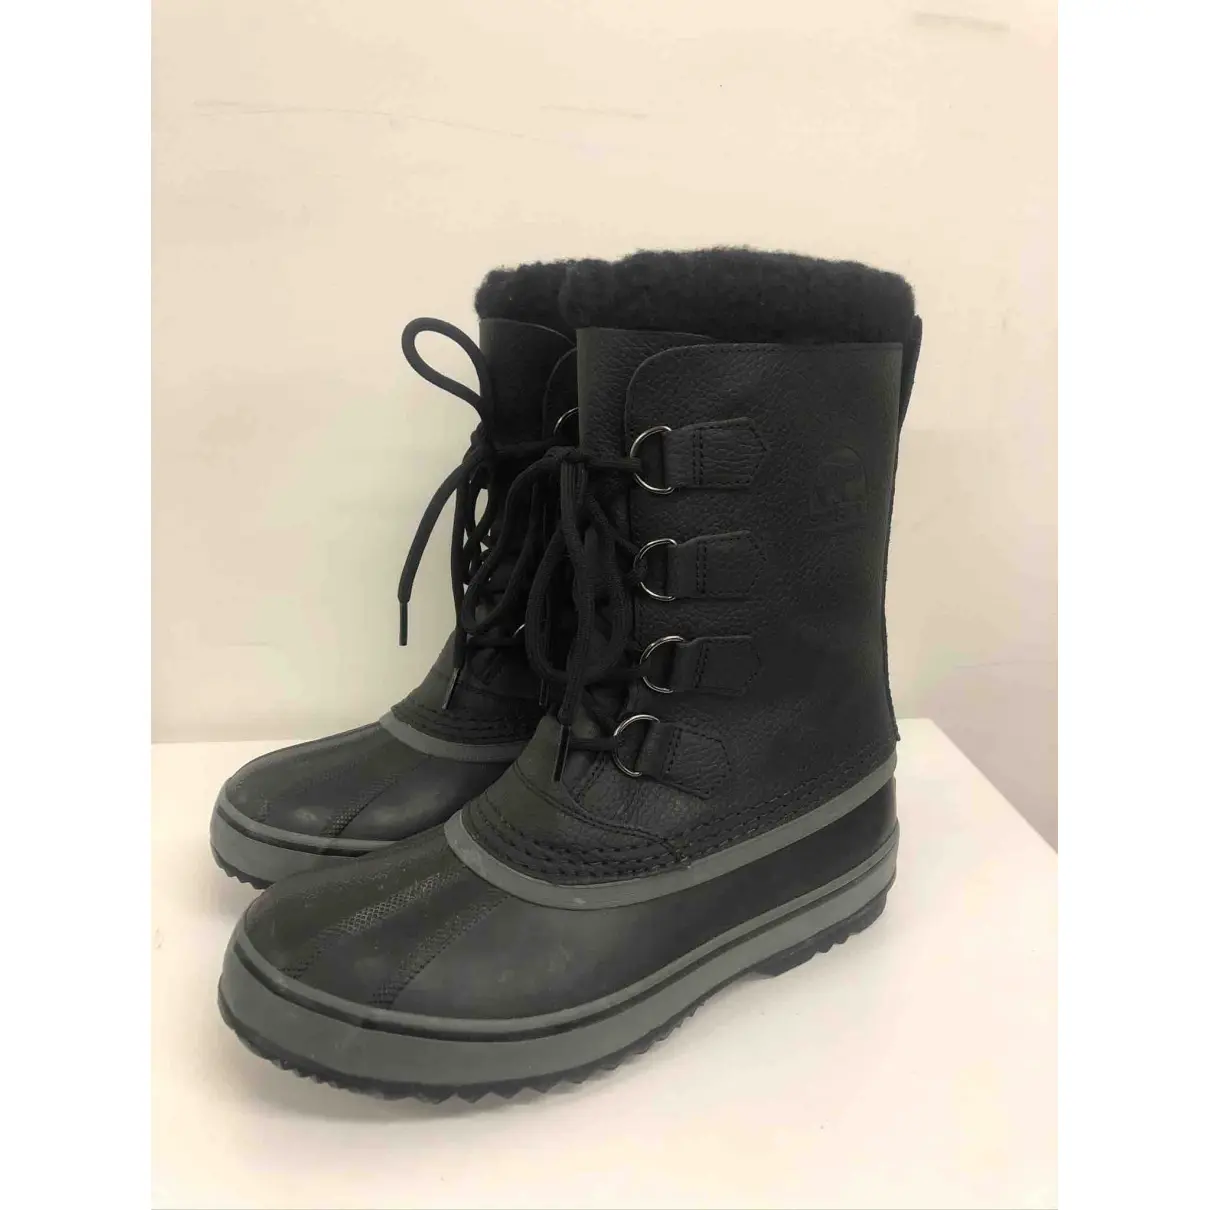 Sorel Leather boots for sale